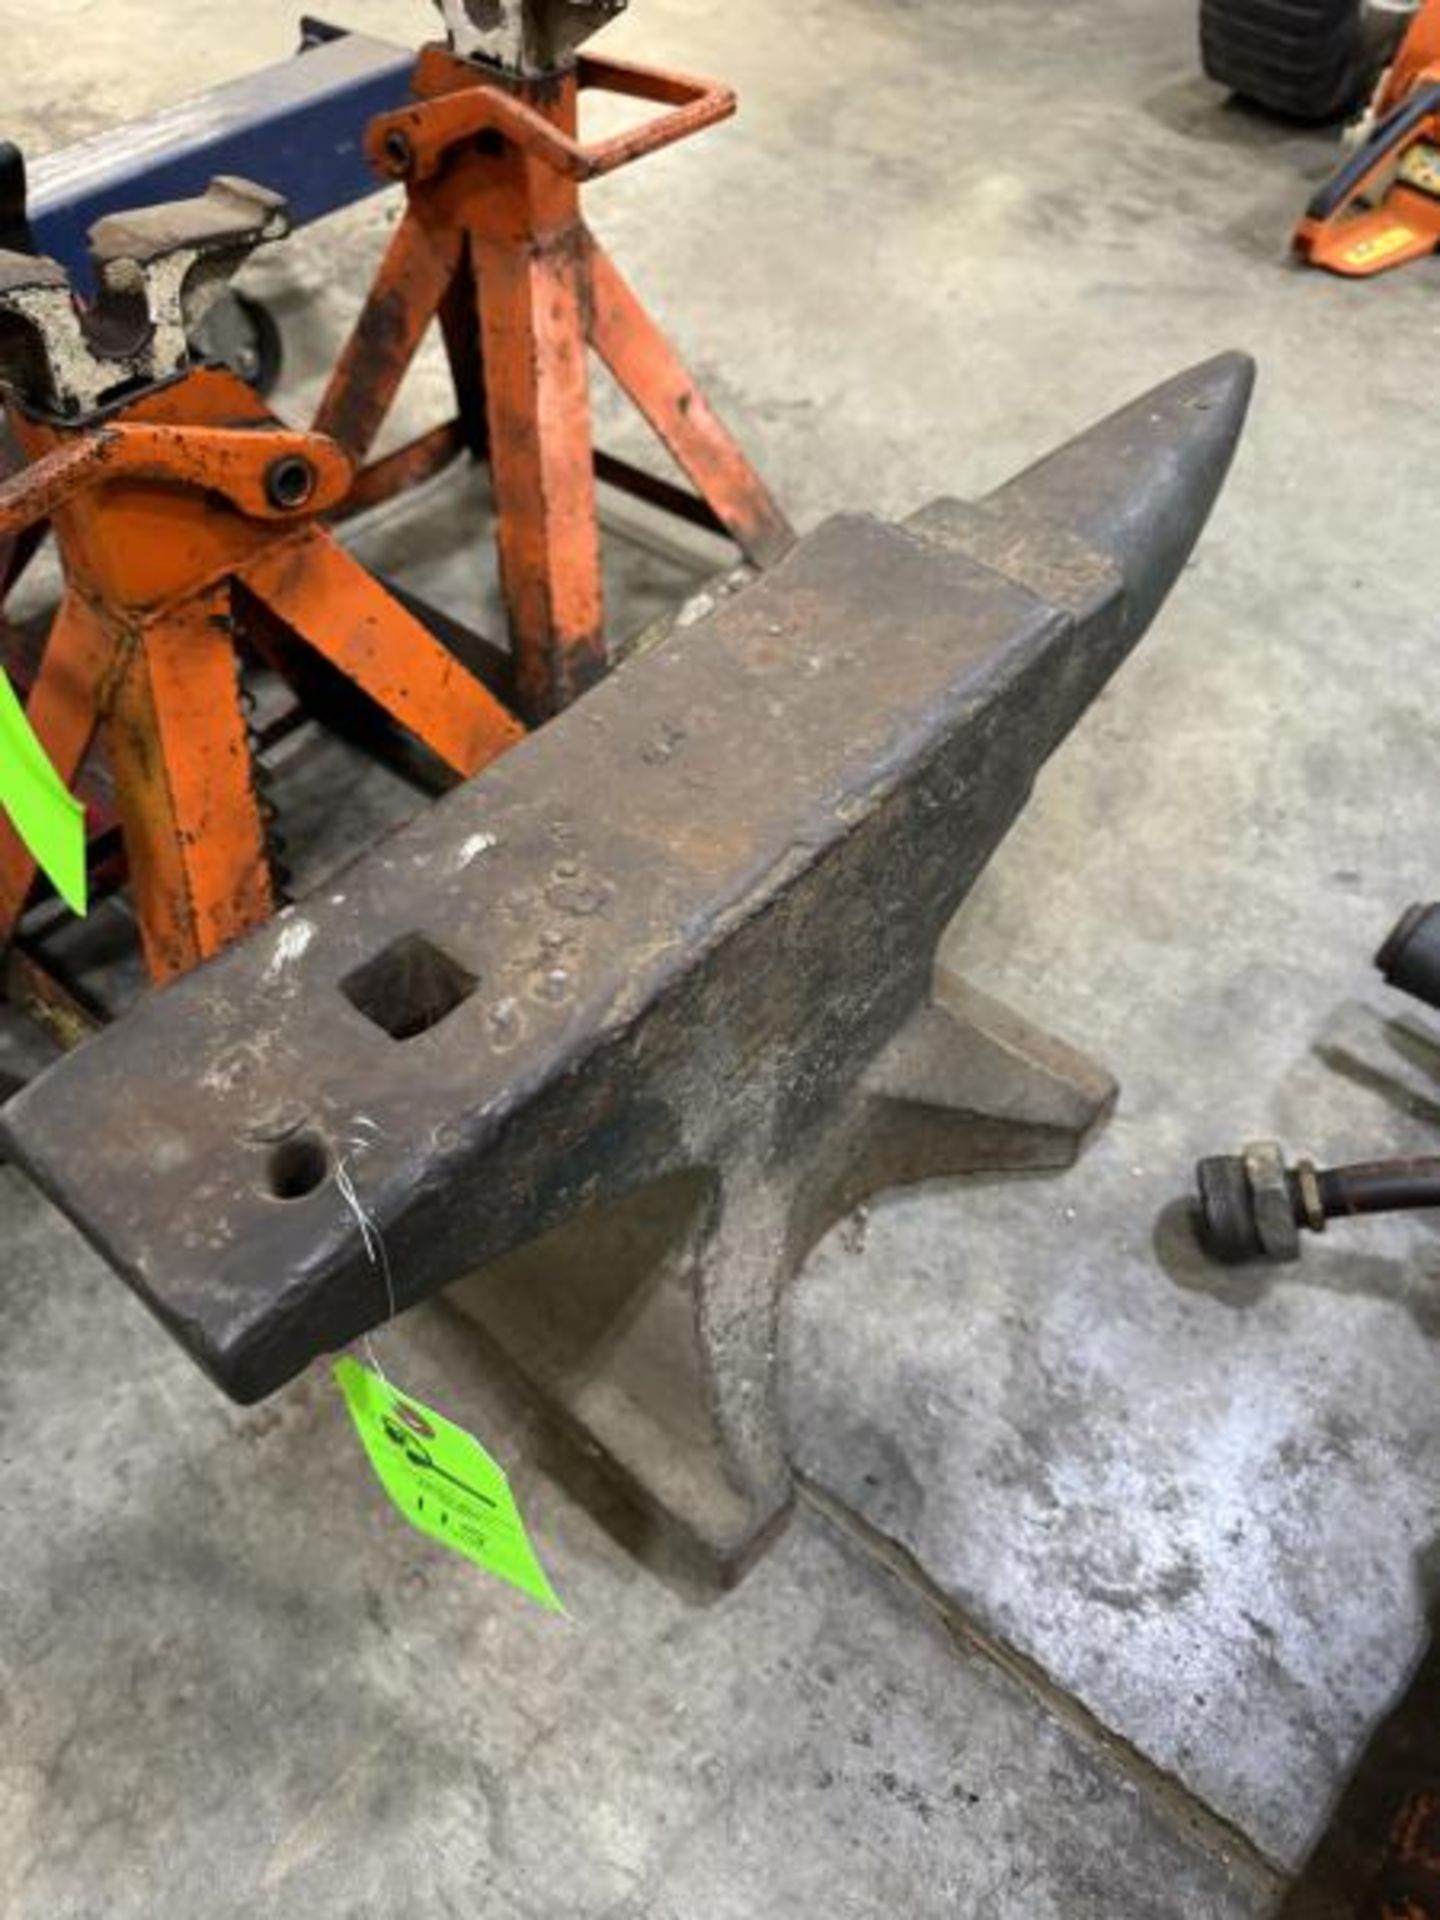 Anvil 23.5" Long Belived to be Trenton - Image 2 of 6